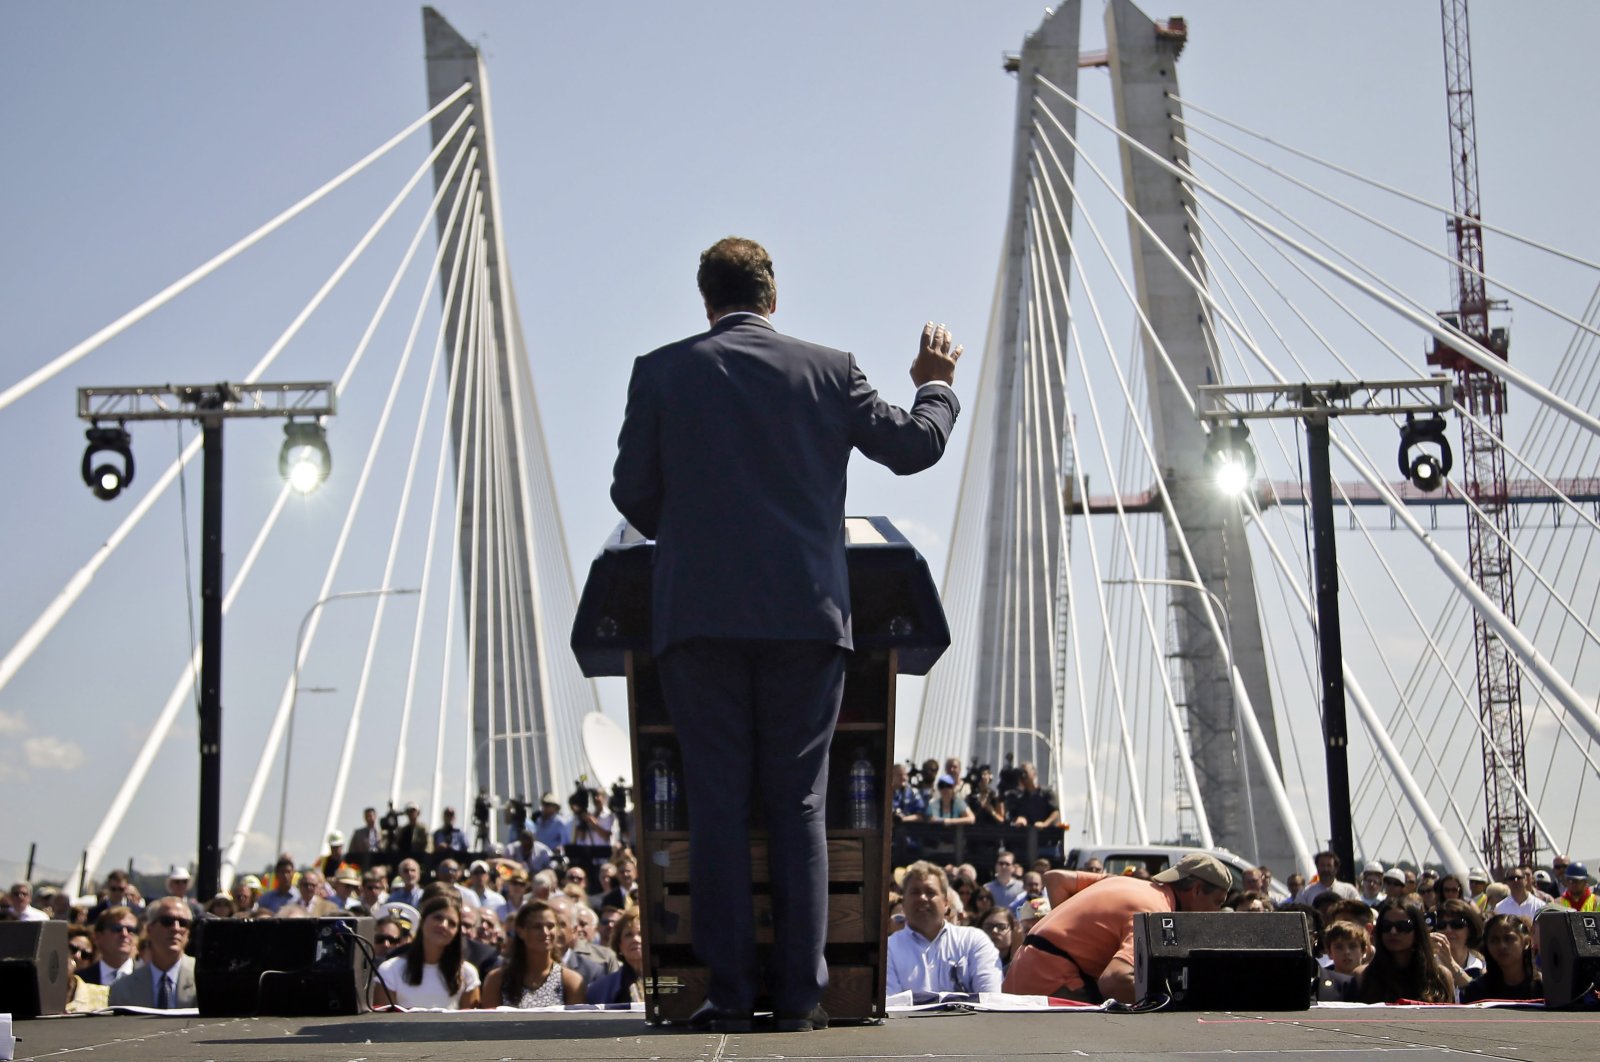 New York Gov. Andrew Cuomo speaks at a ribbon-cutting ceremony for the new Gov. Mario M. Cuomo Bridge, replacing the Tappan Zee Bridge in Tarrytown, N.Y., the U.S., Aug. 24, 2017. (AP Photo)